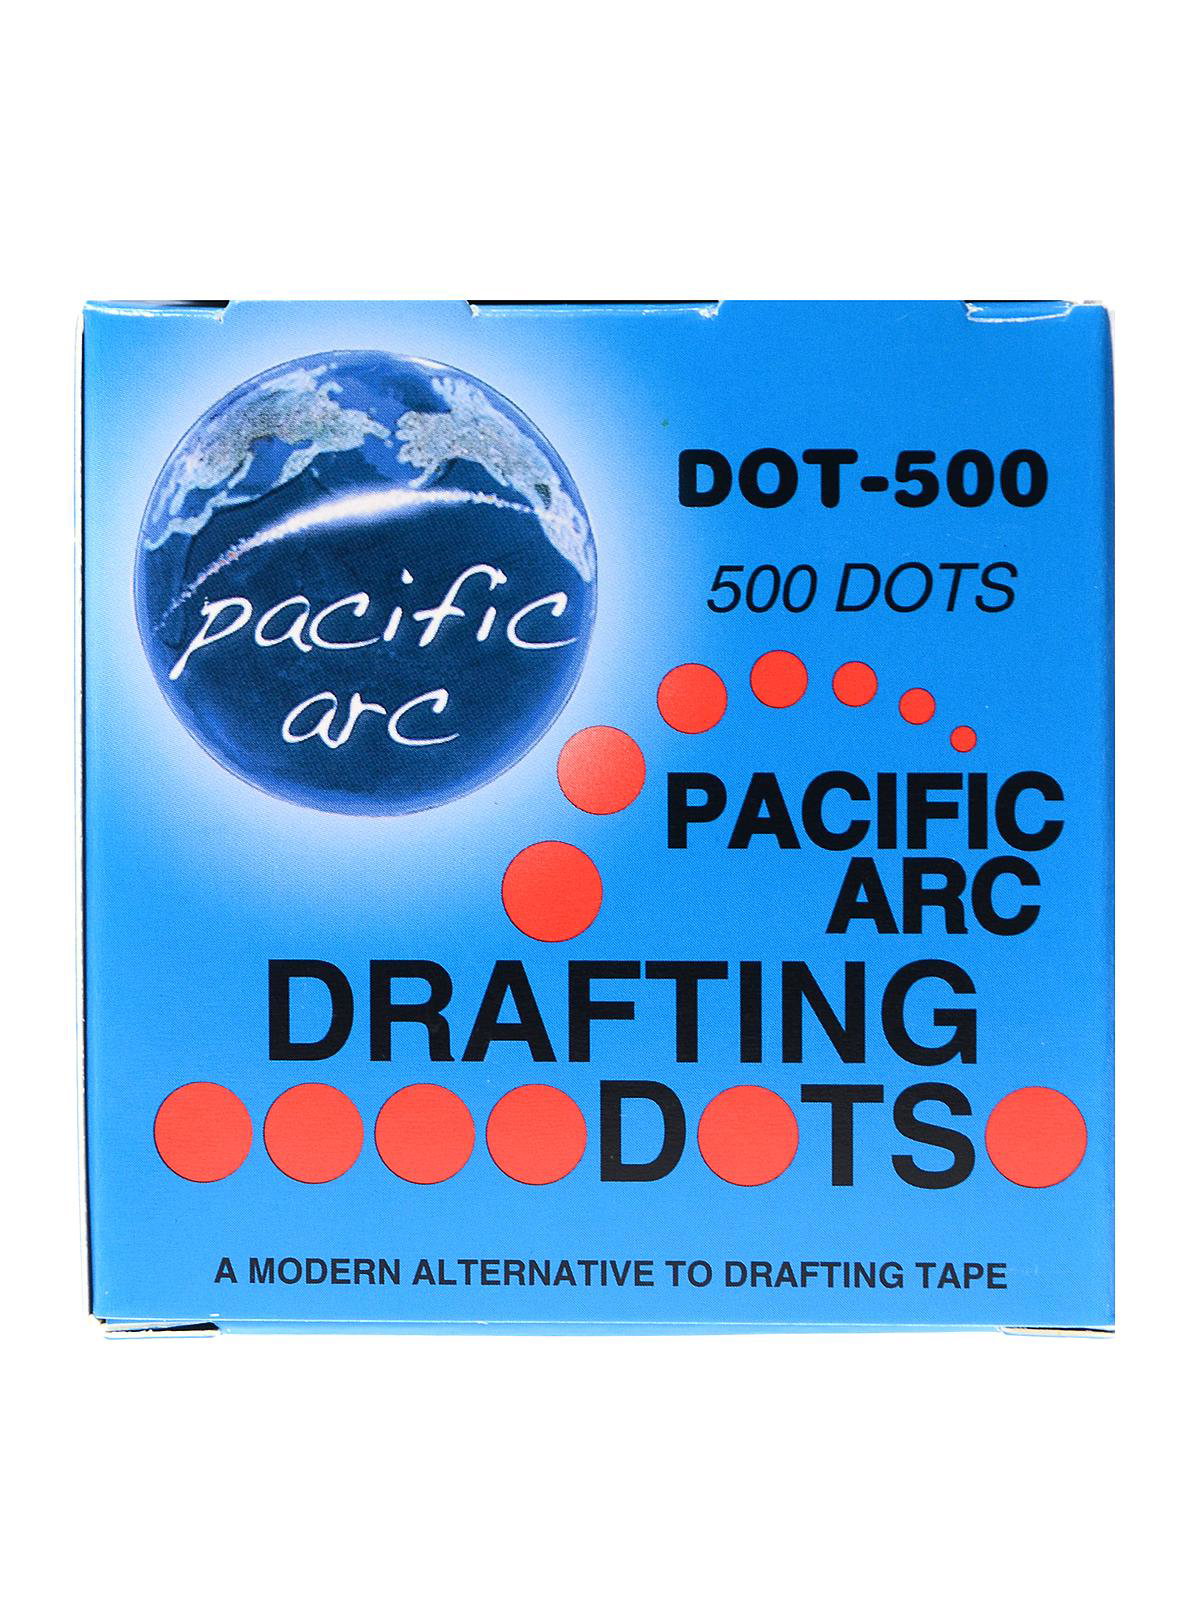 Mr. Pen- Professional Drafting Tape, 500 Pieces Drafting Dots, Art Tape, Tape Dots, Artist Masking Tape, Drafting Supplies, Architectural Dots Tape, S